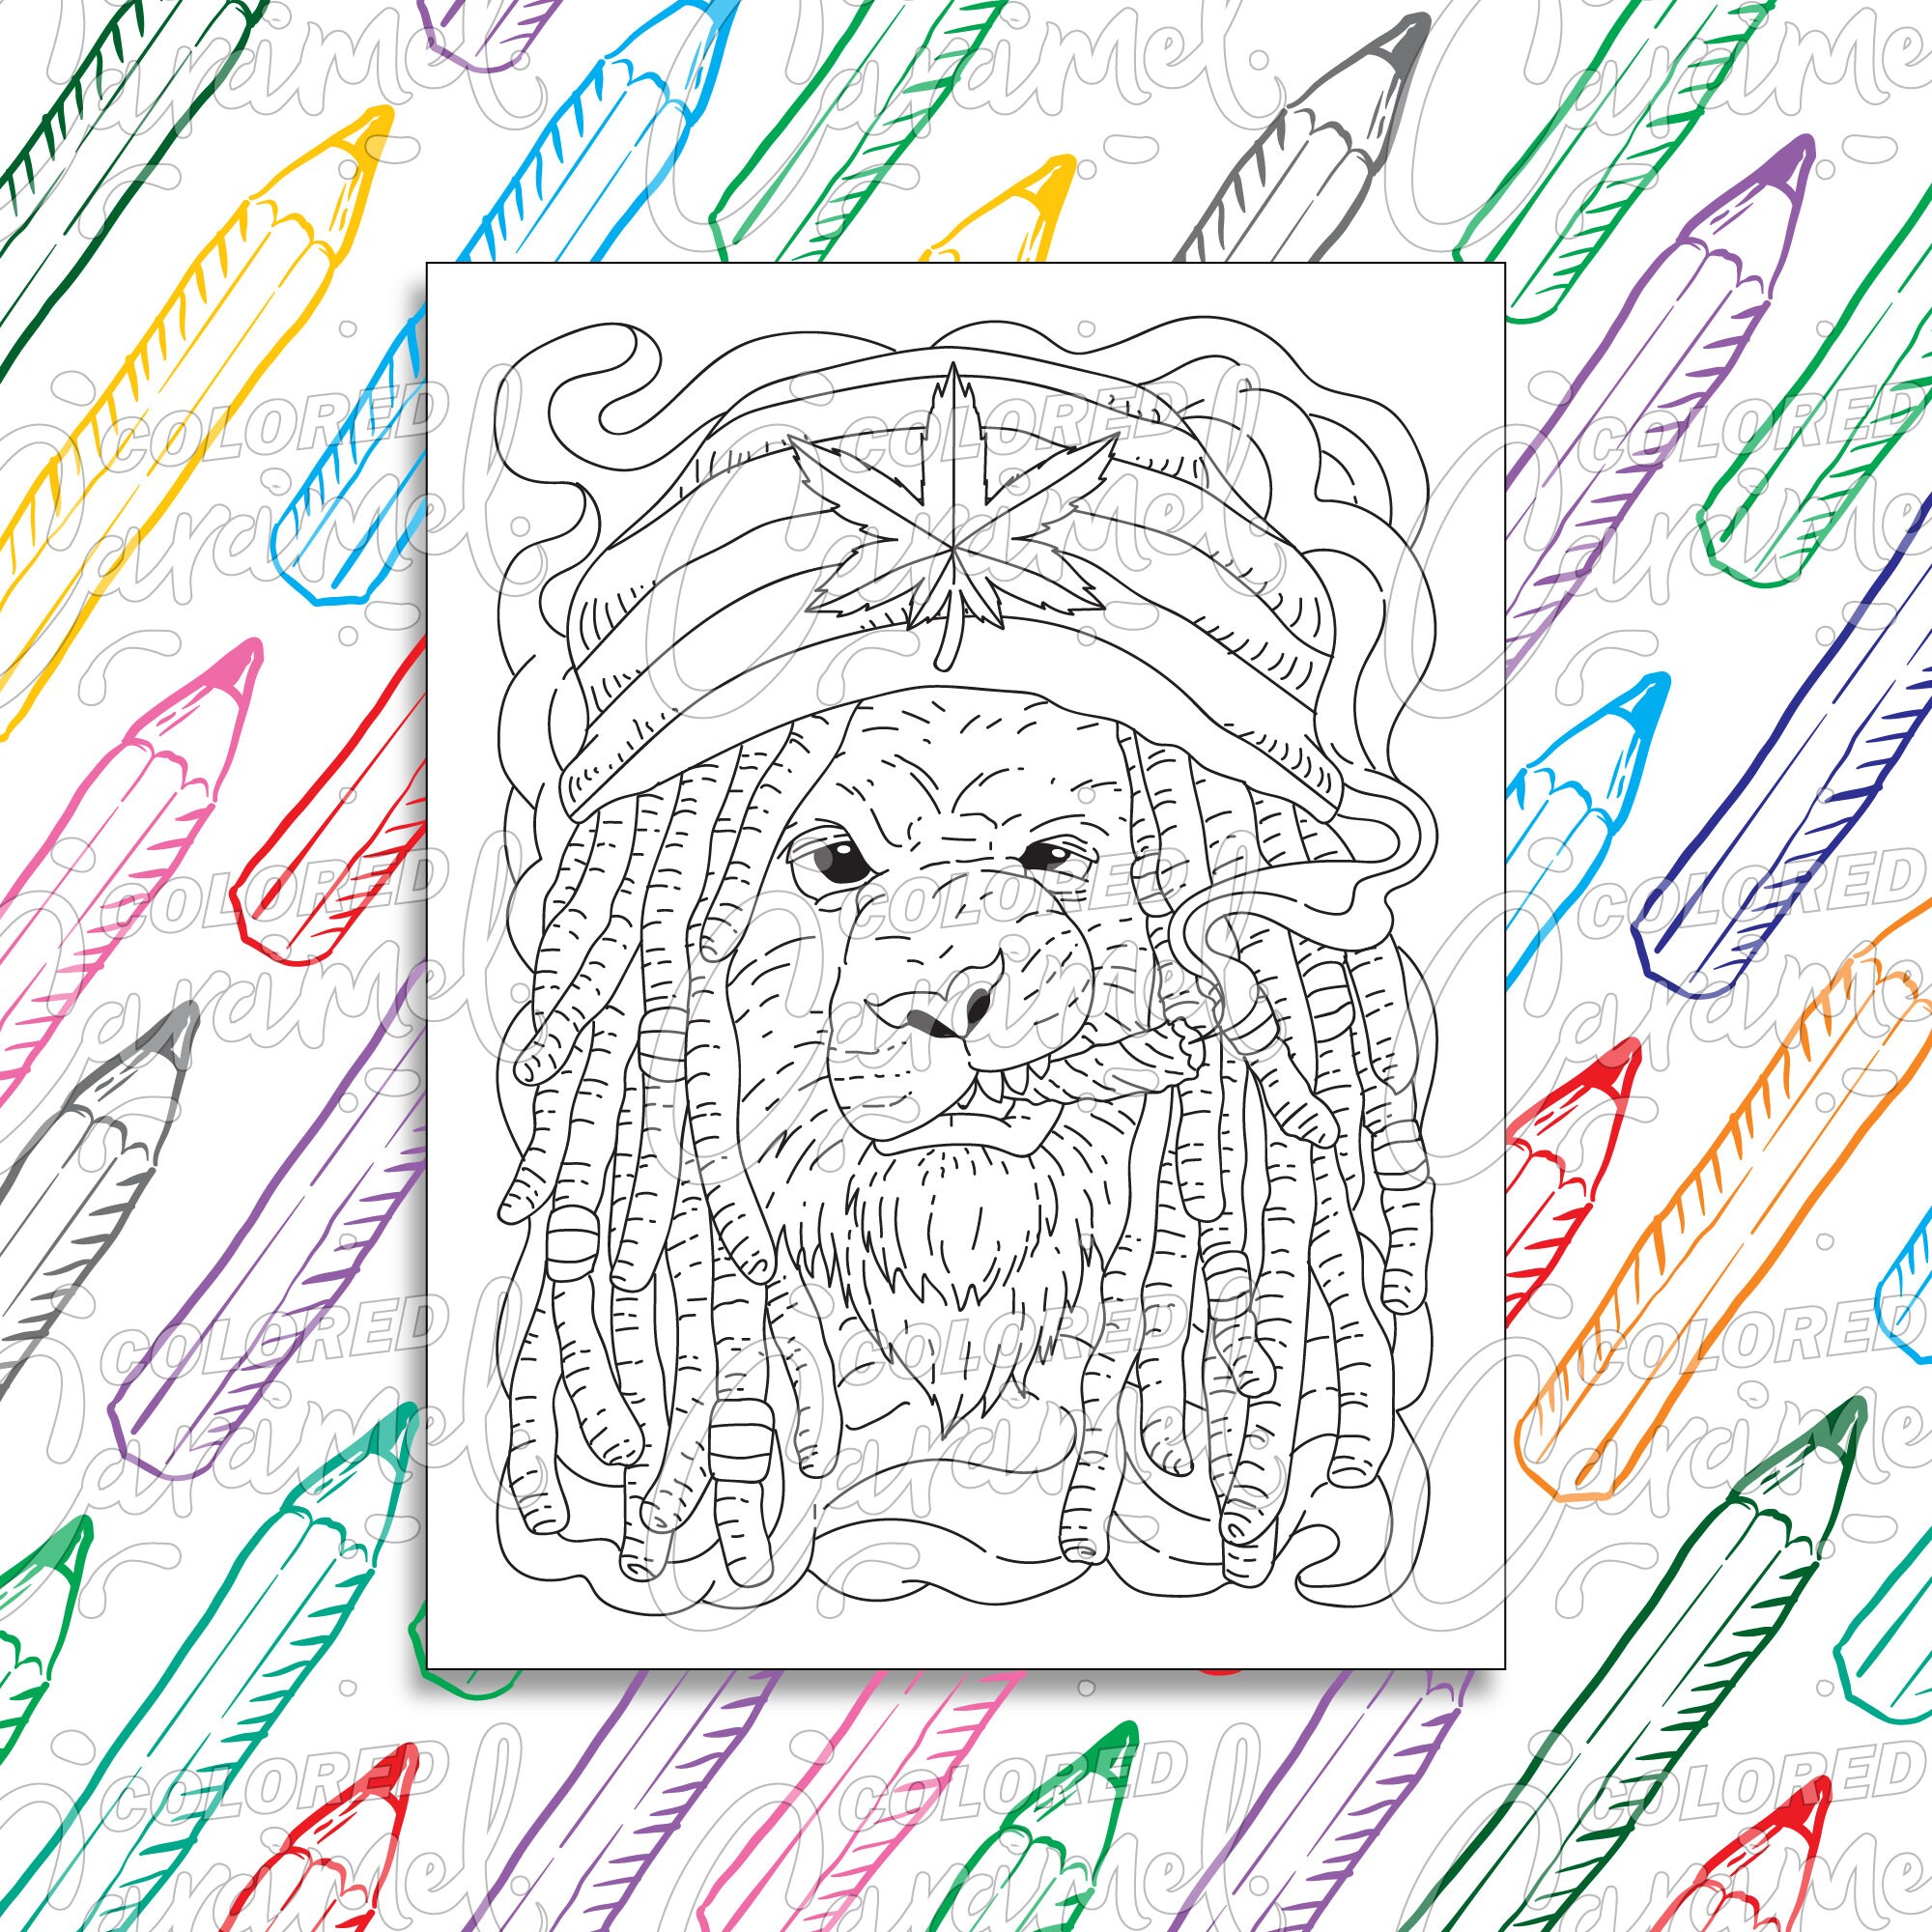 Stoner Coloring Page Digital Download PDF, Trippy, Funny and Cool Rasta Lion Smoking Weed, Printable Psychedelic Drawing & Illustration